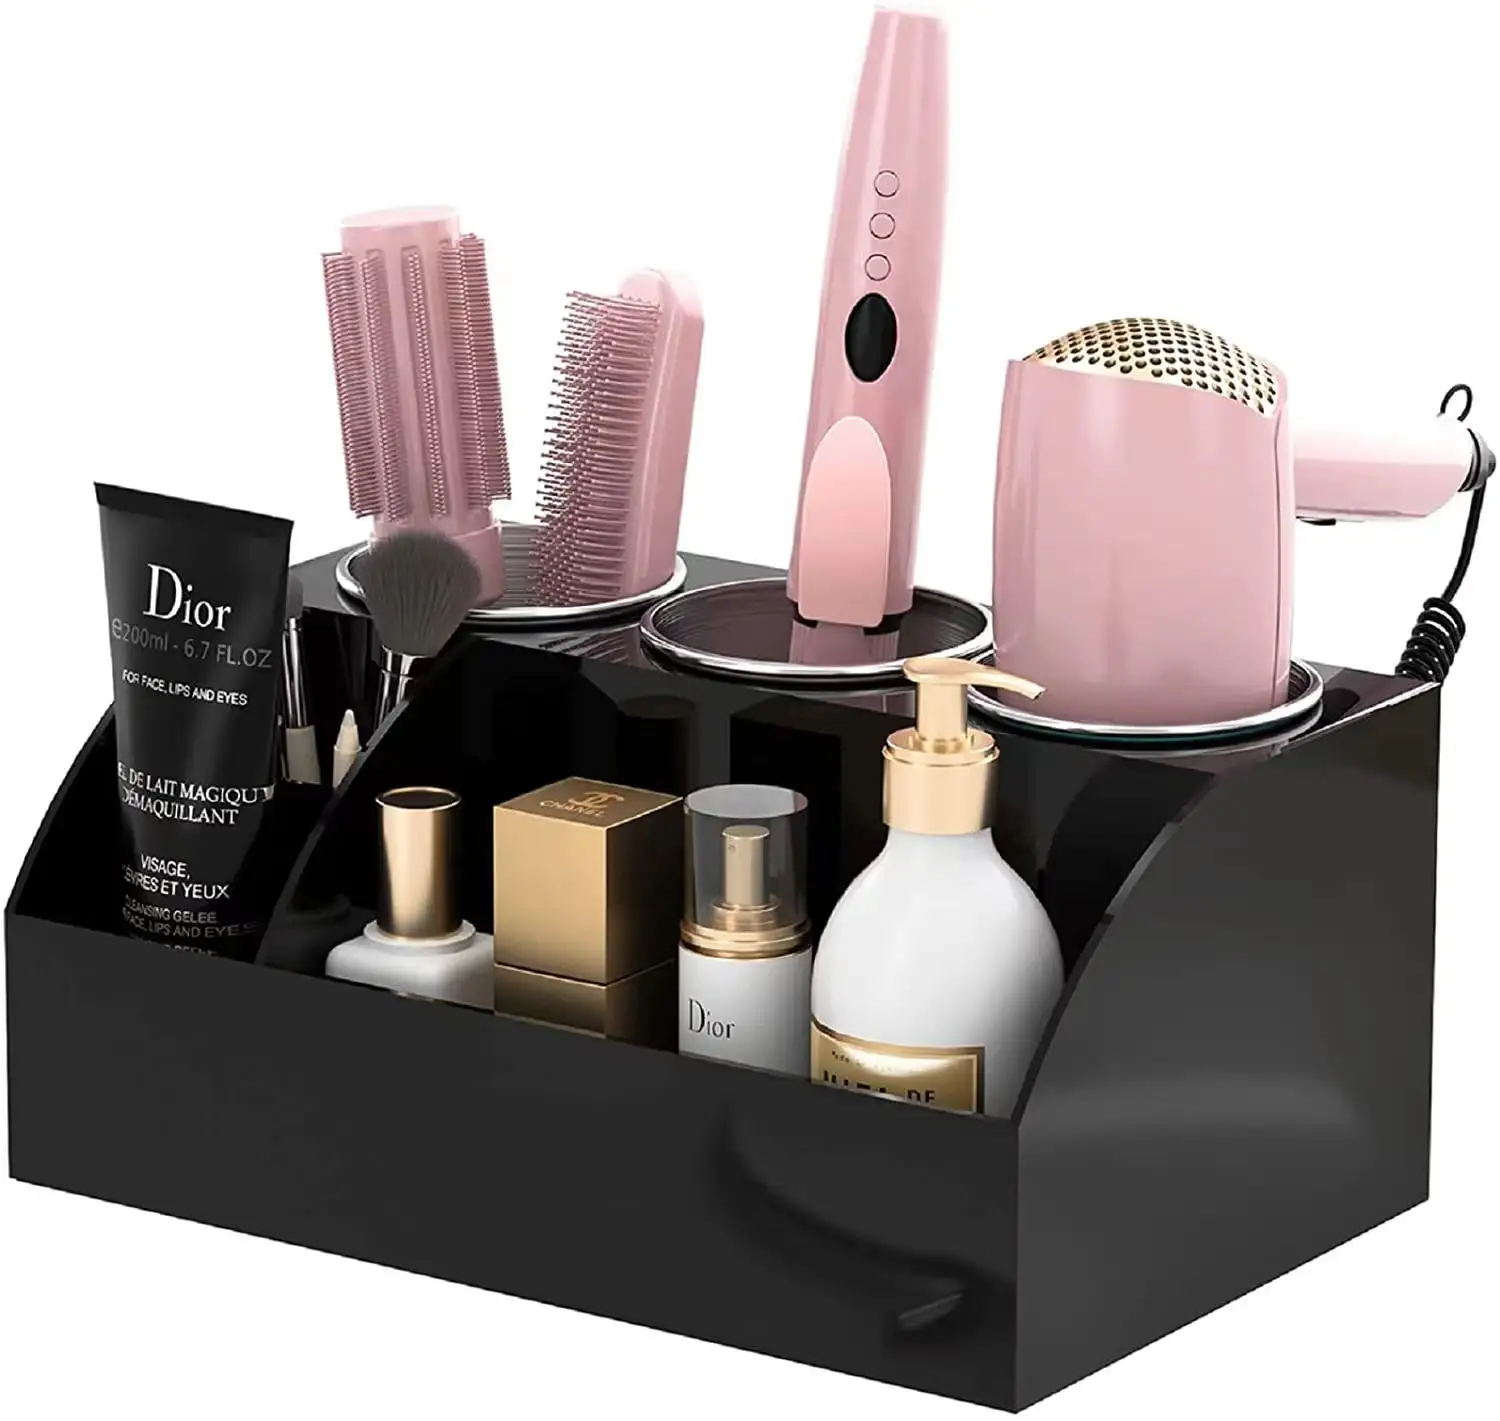 Acrylic storage stand for makdeup accessories hair tool organizer with 3 removable steel cups